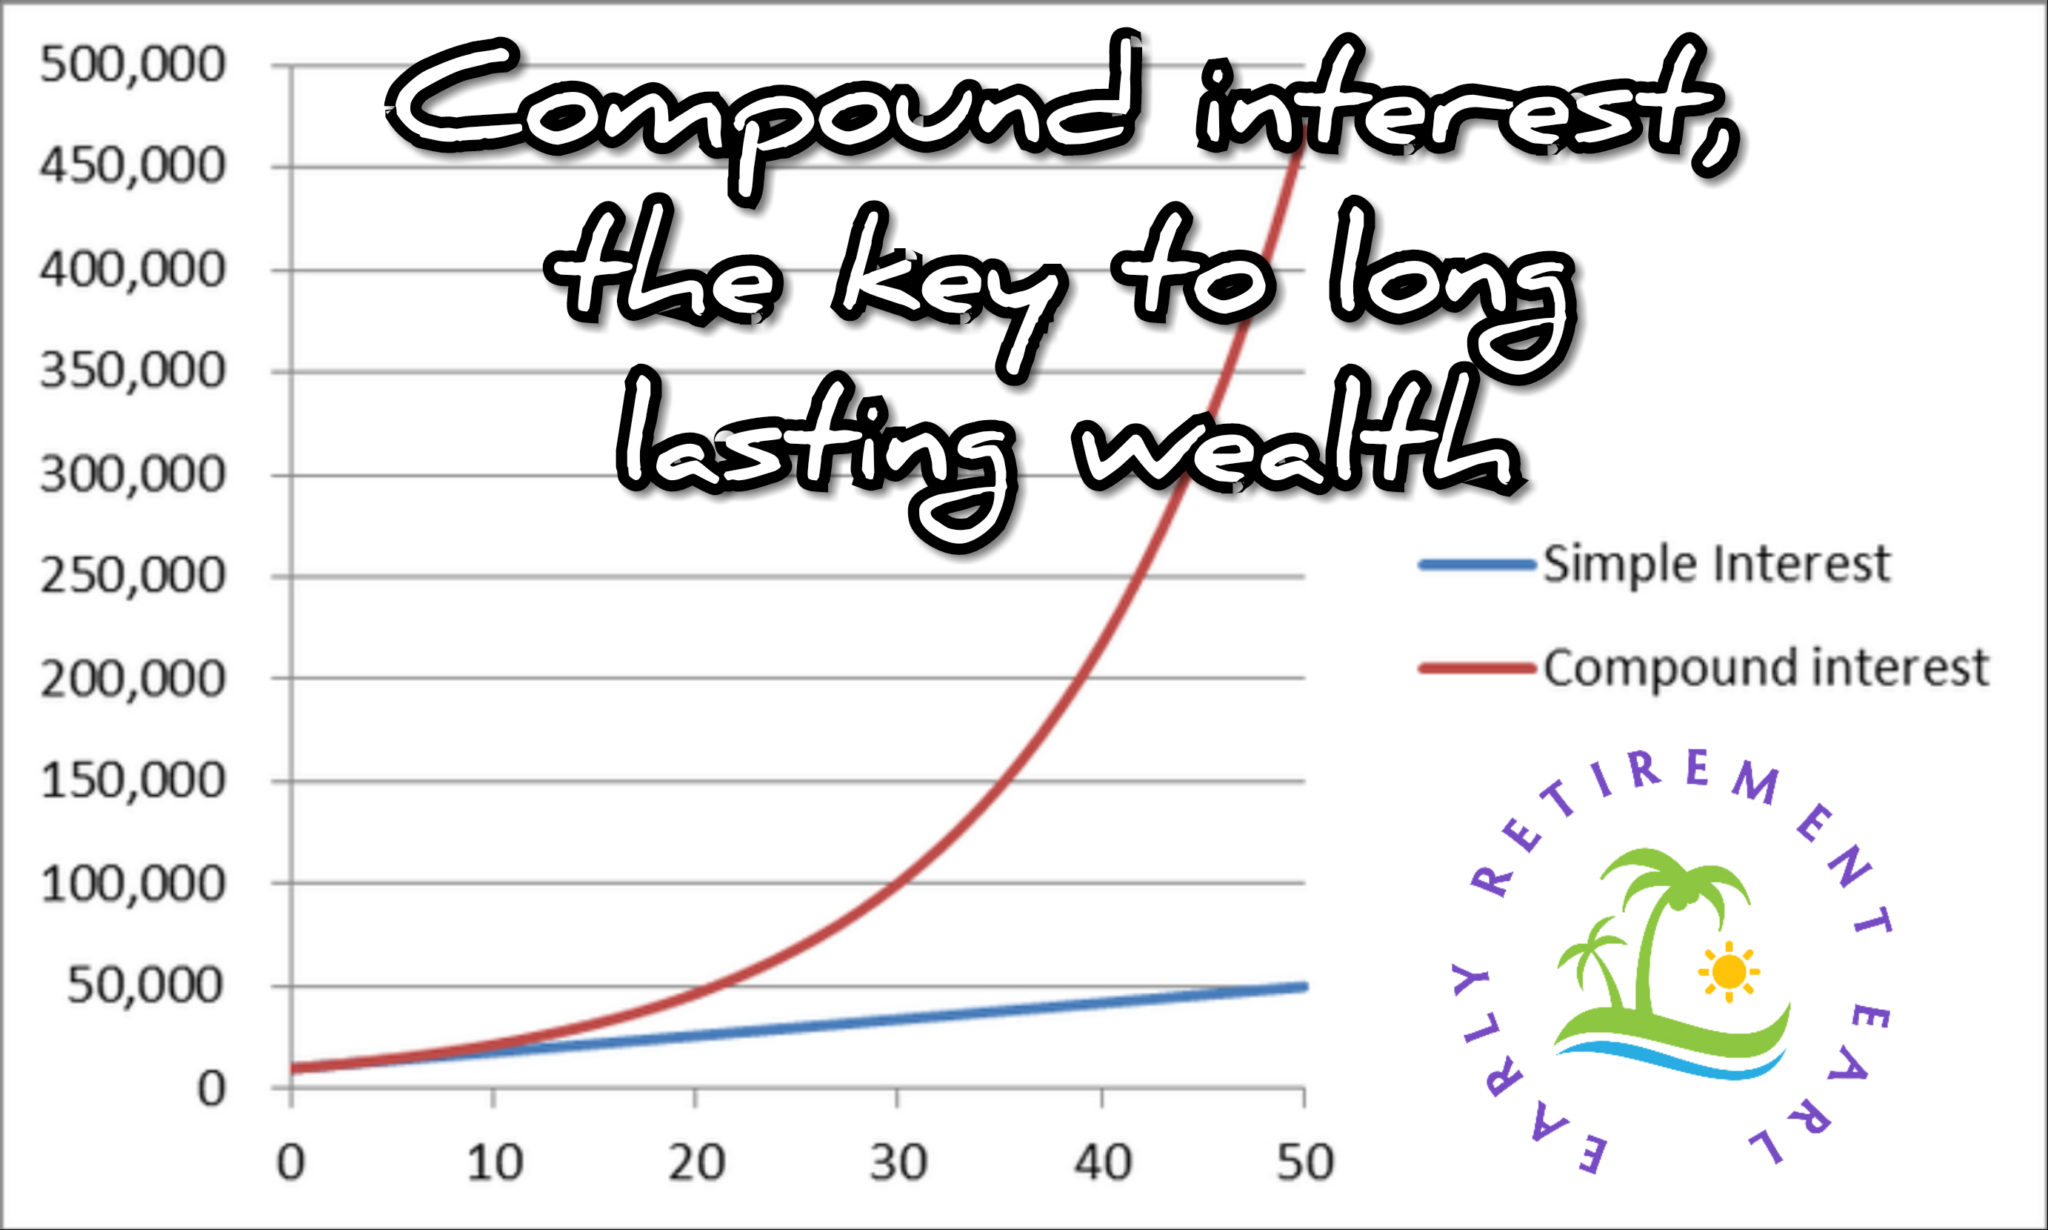 How compound interest will make you rich. The key to long lasting wealth